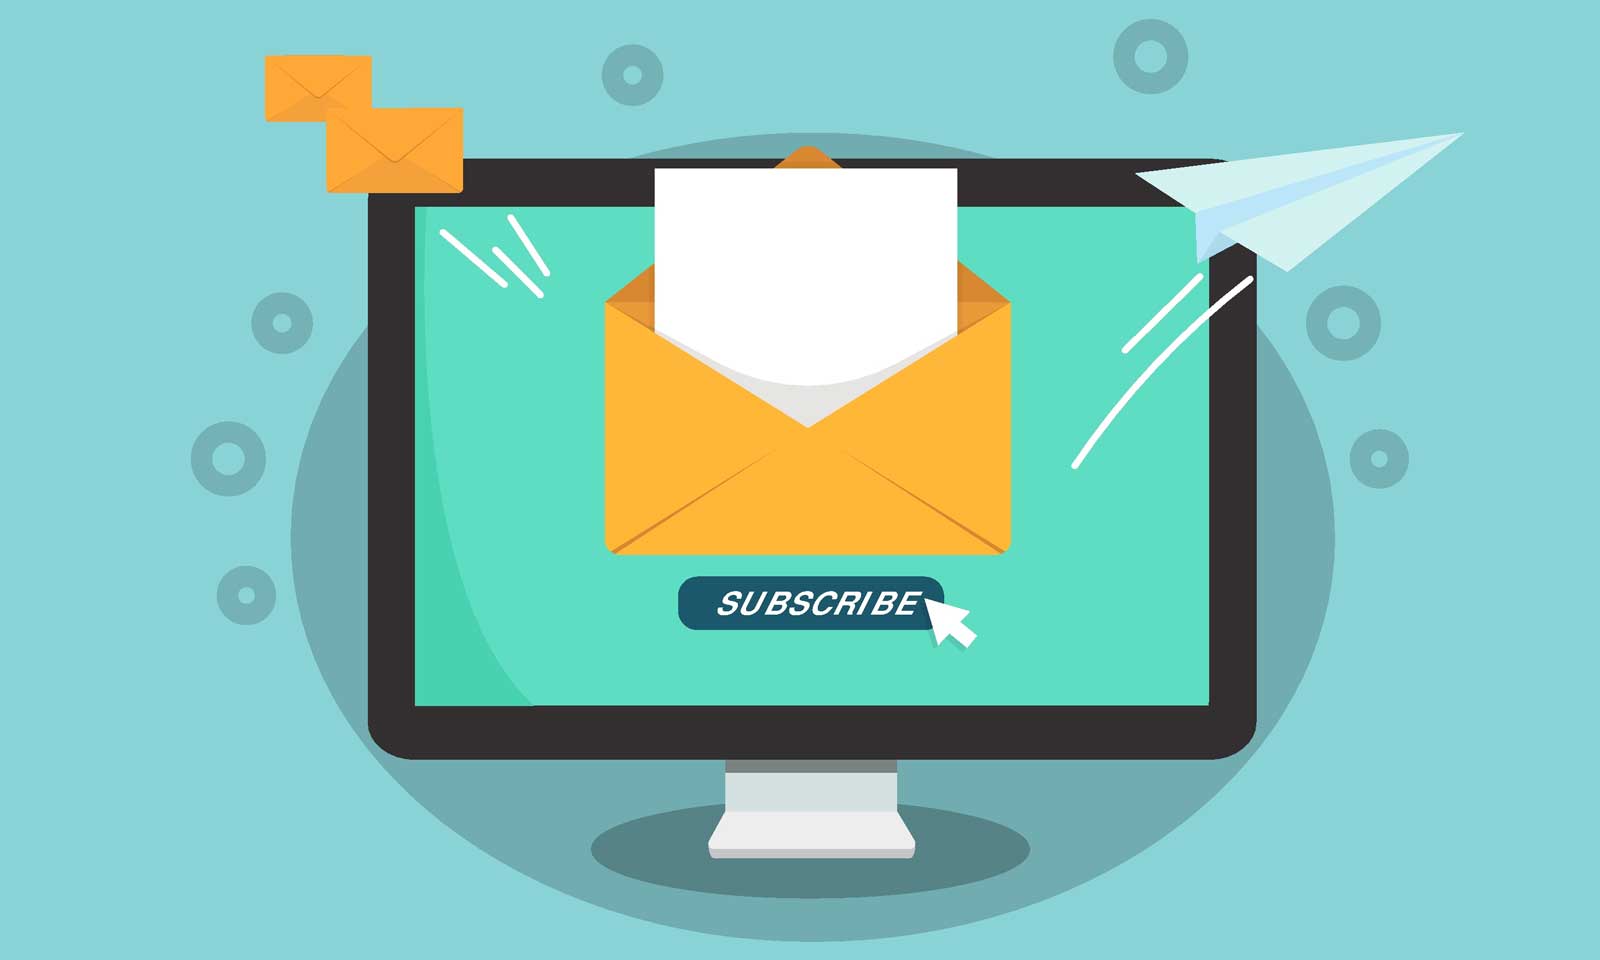 3 Simple Ways Ecommerce Businesses Can Personalize Customer Emails